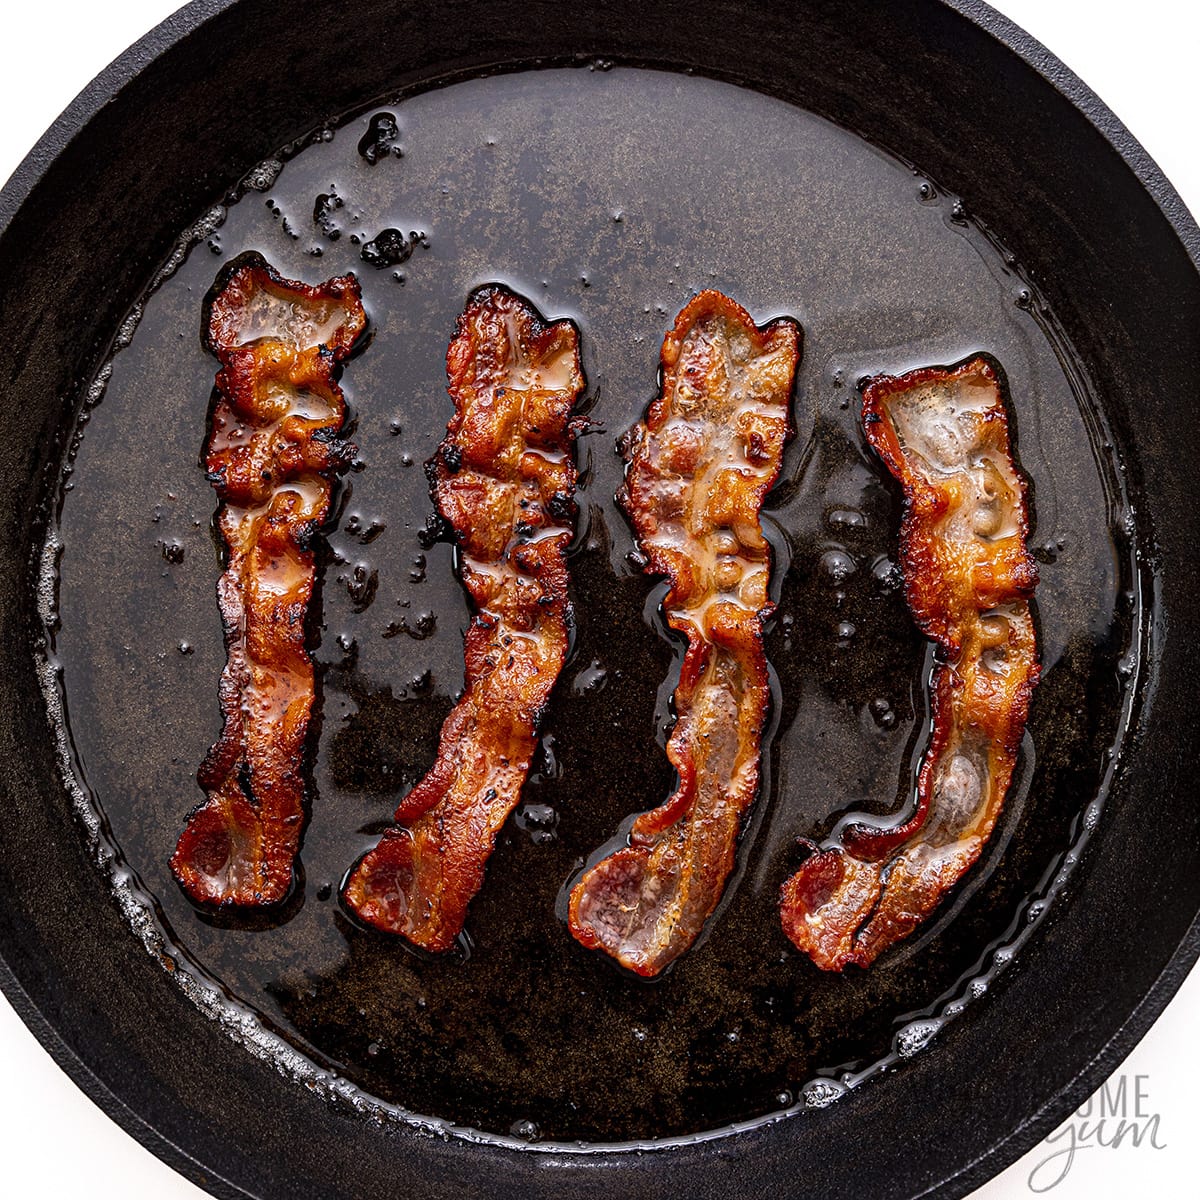 Bacon cooked in a skillet.